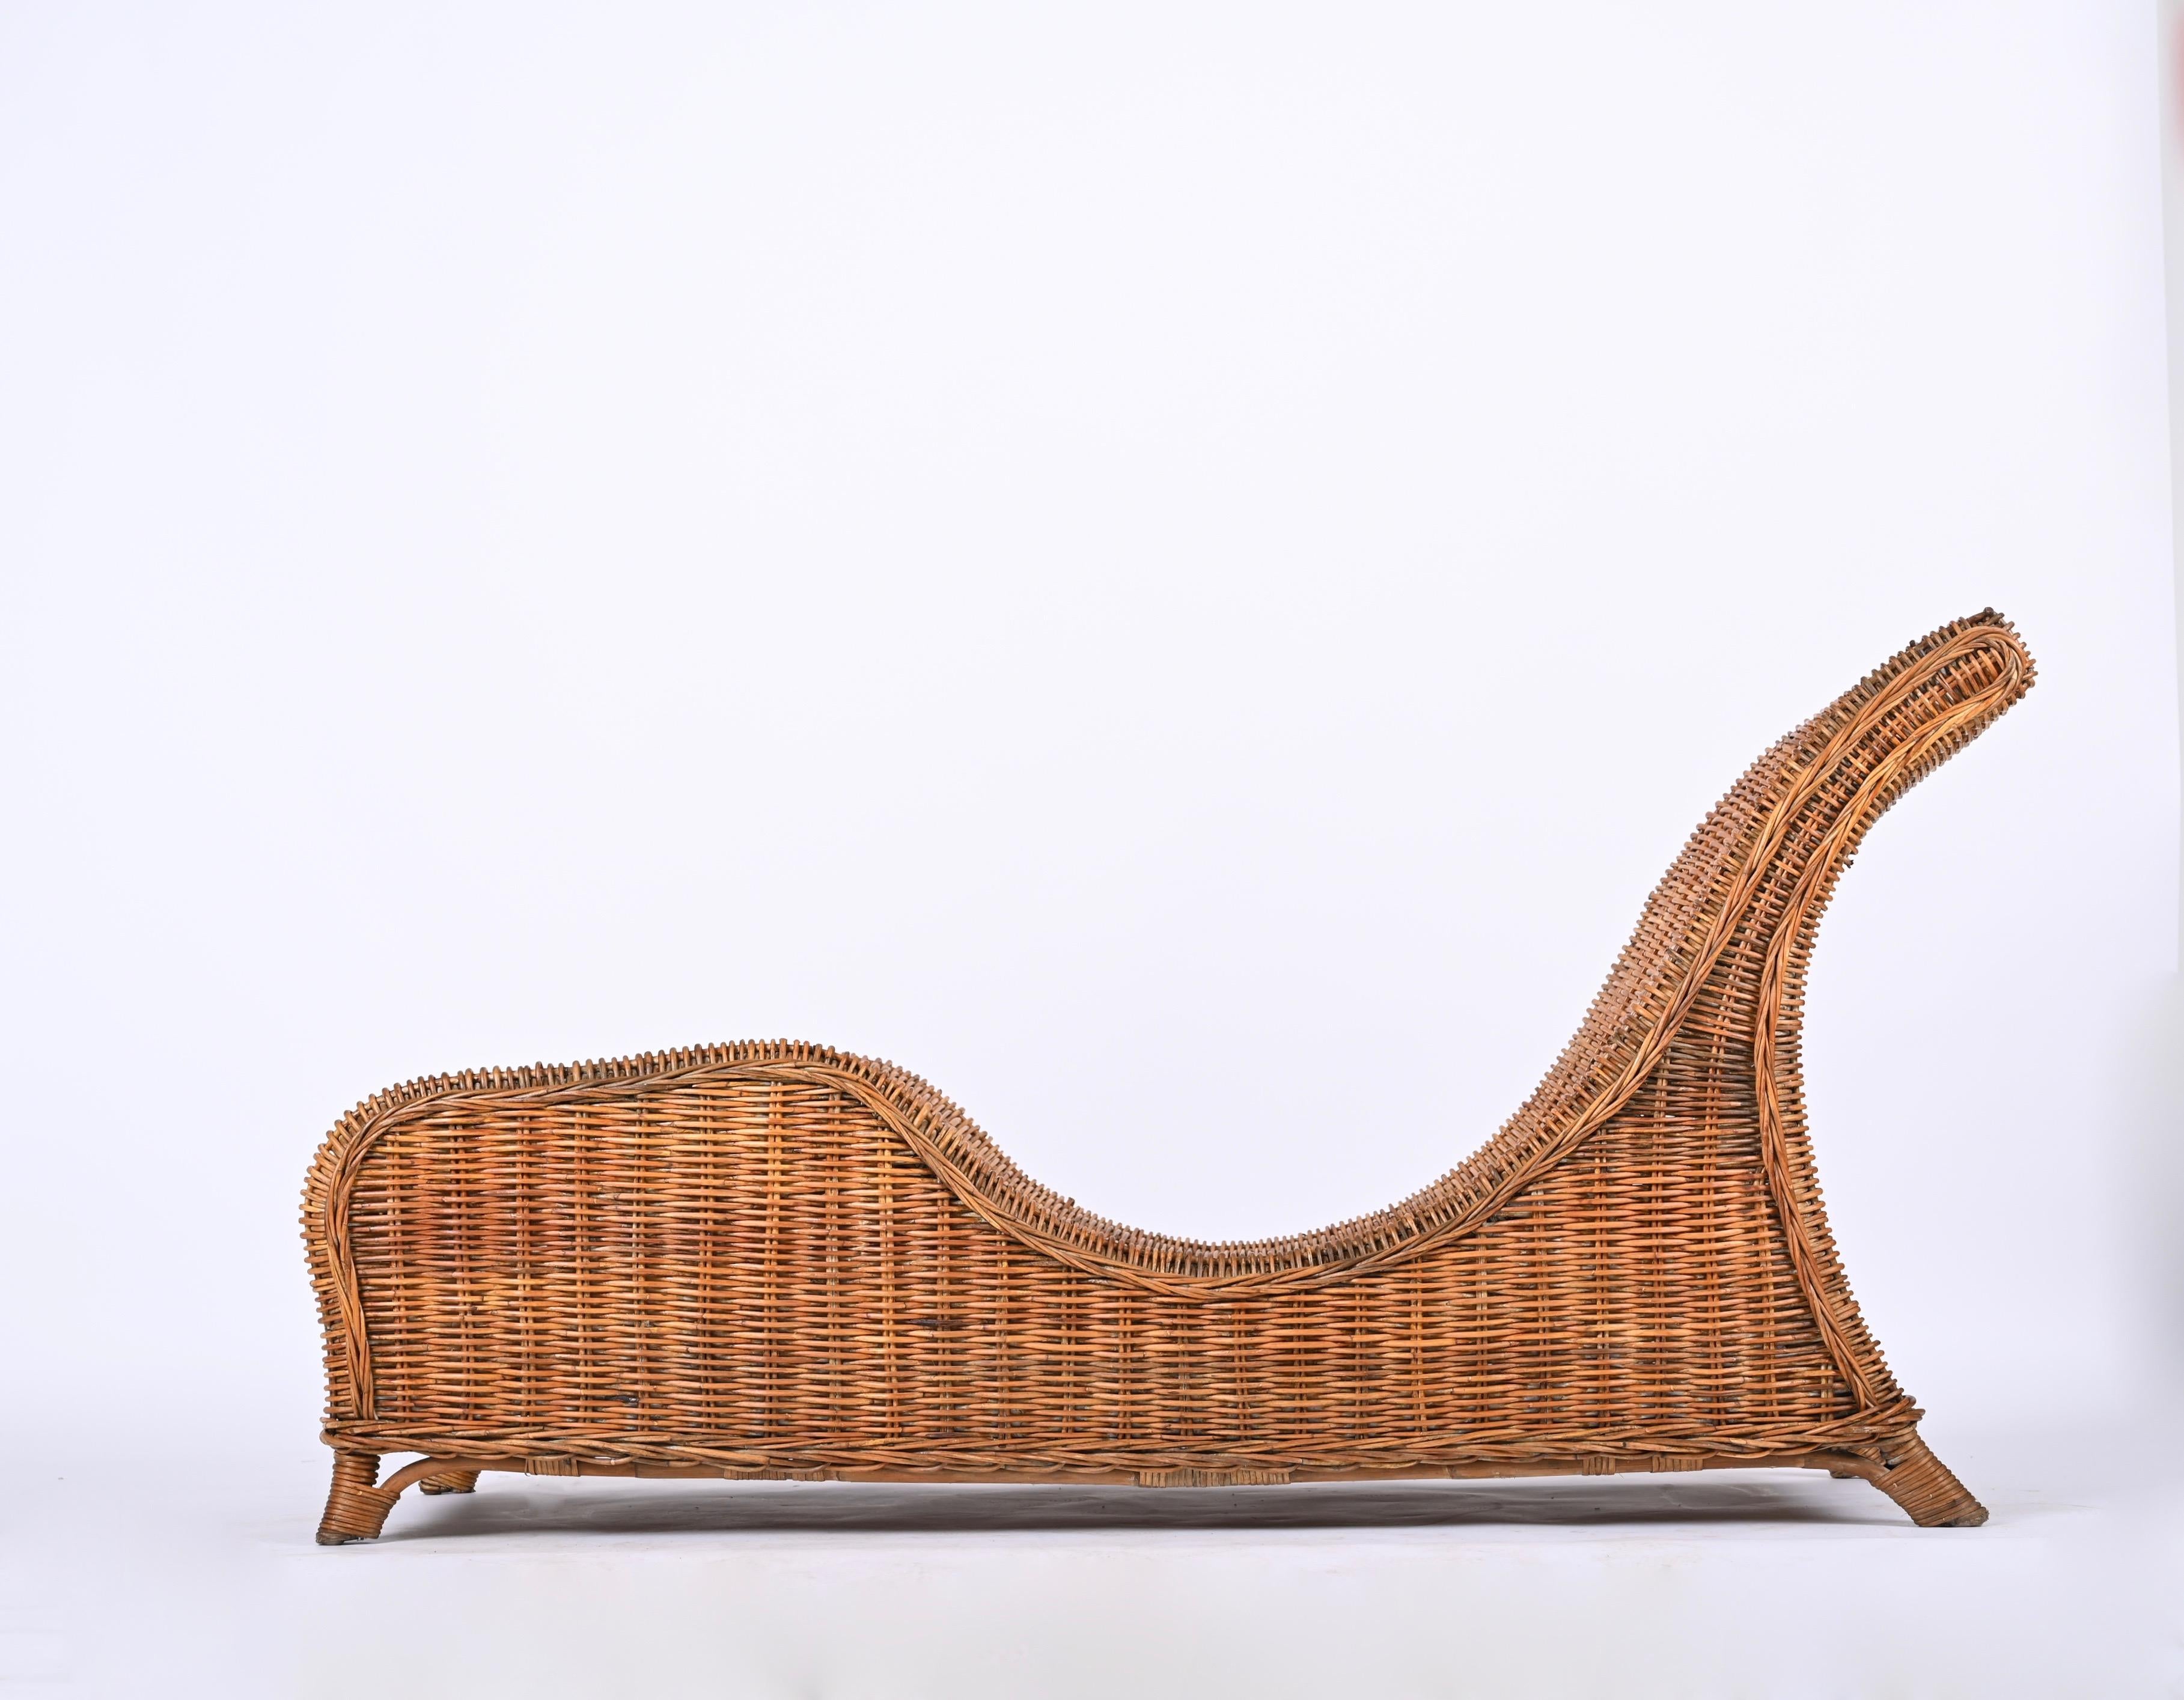 Midcentury Modern Bamboo and Wicker Italian Chaise Longue, 1960s In Good Condition For Sale In Roma, IT